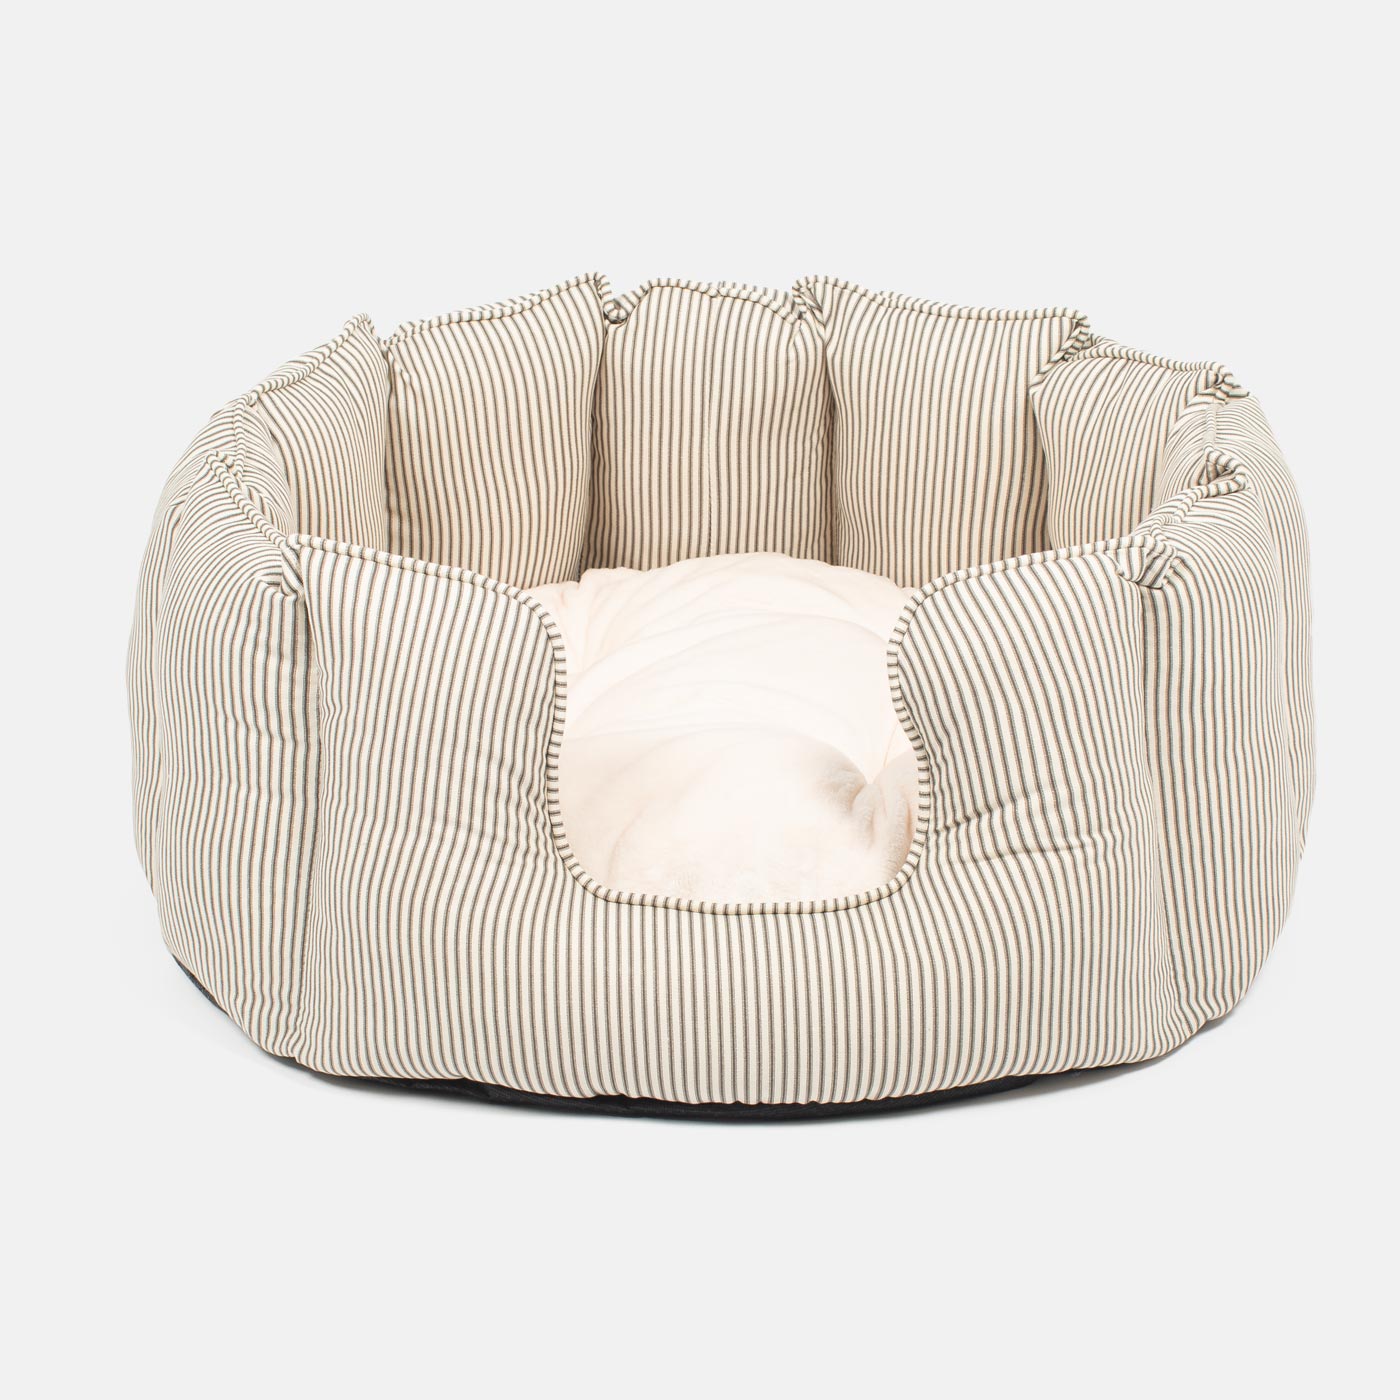  Discover Our Luxurious High Wall Bed For Dogs & Puppies, Featuring Reversible Inner Cushion With Teddy Fleece To Craft The Perfect Dog Bed In Stunning Regency Stripe! Available To Personalize Now at Lords & Labradors US